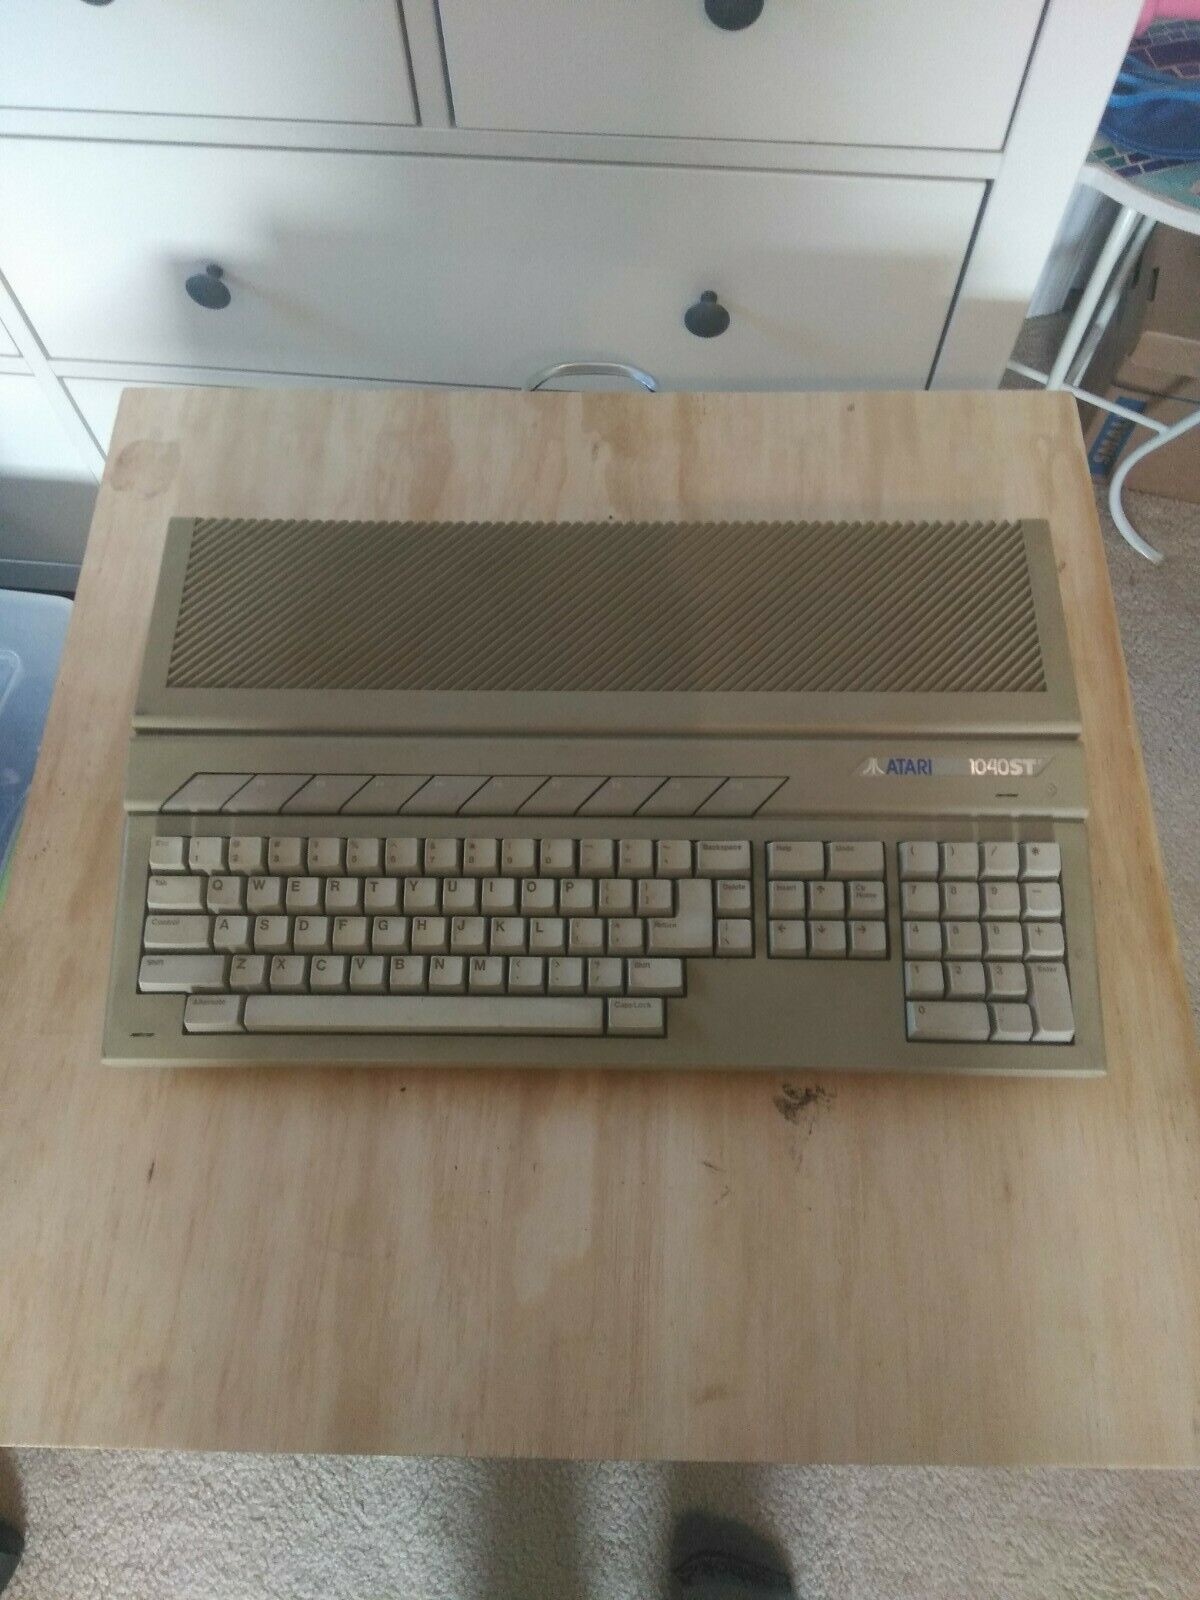 Atari 1040 STF with disks and mouse